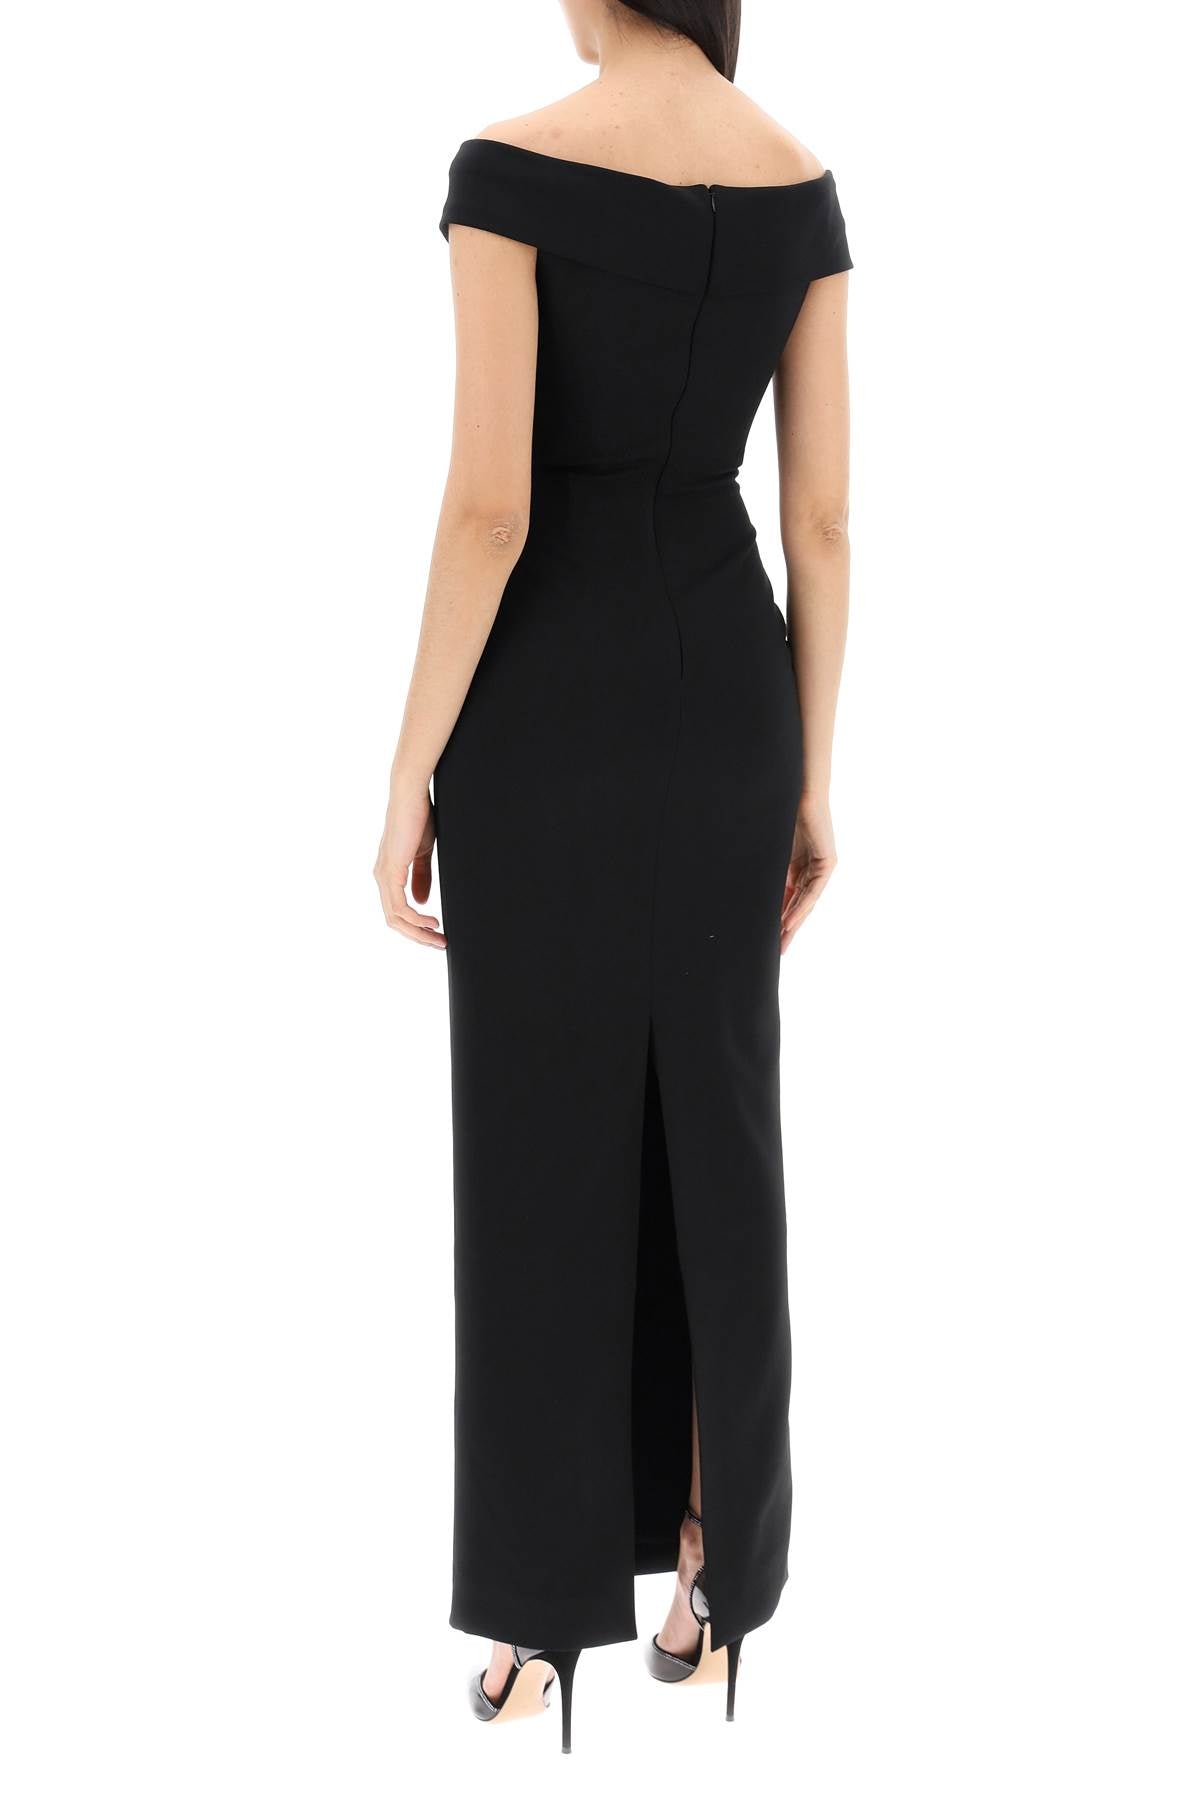 Solace london maxi dress ines with-2